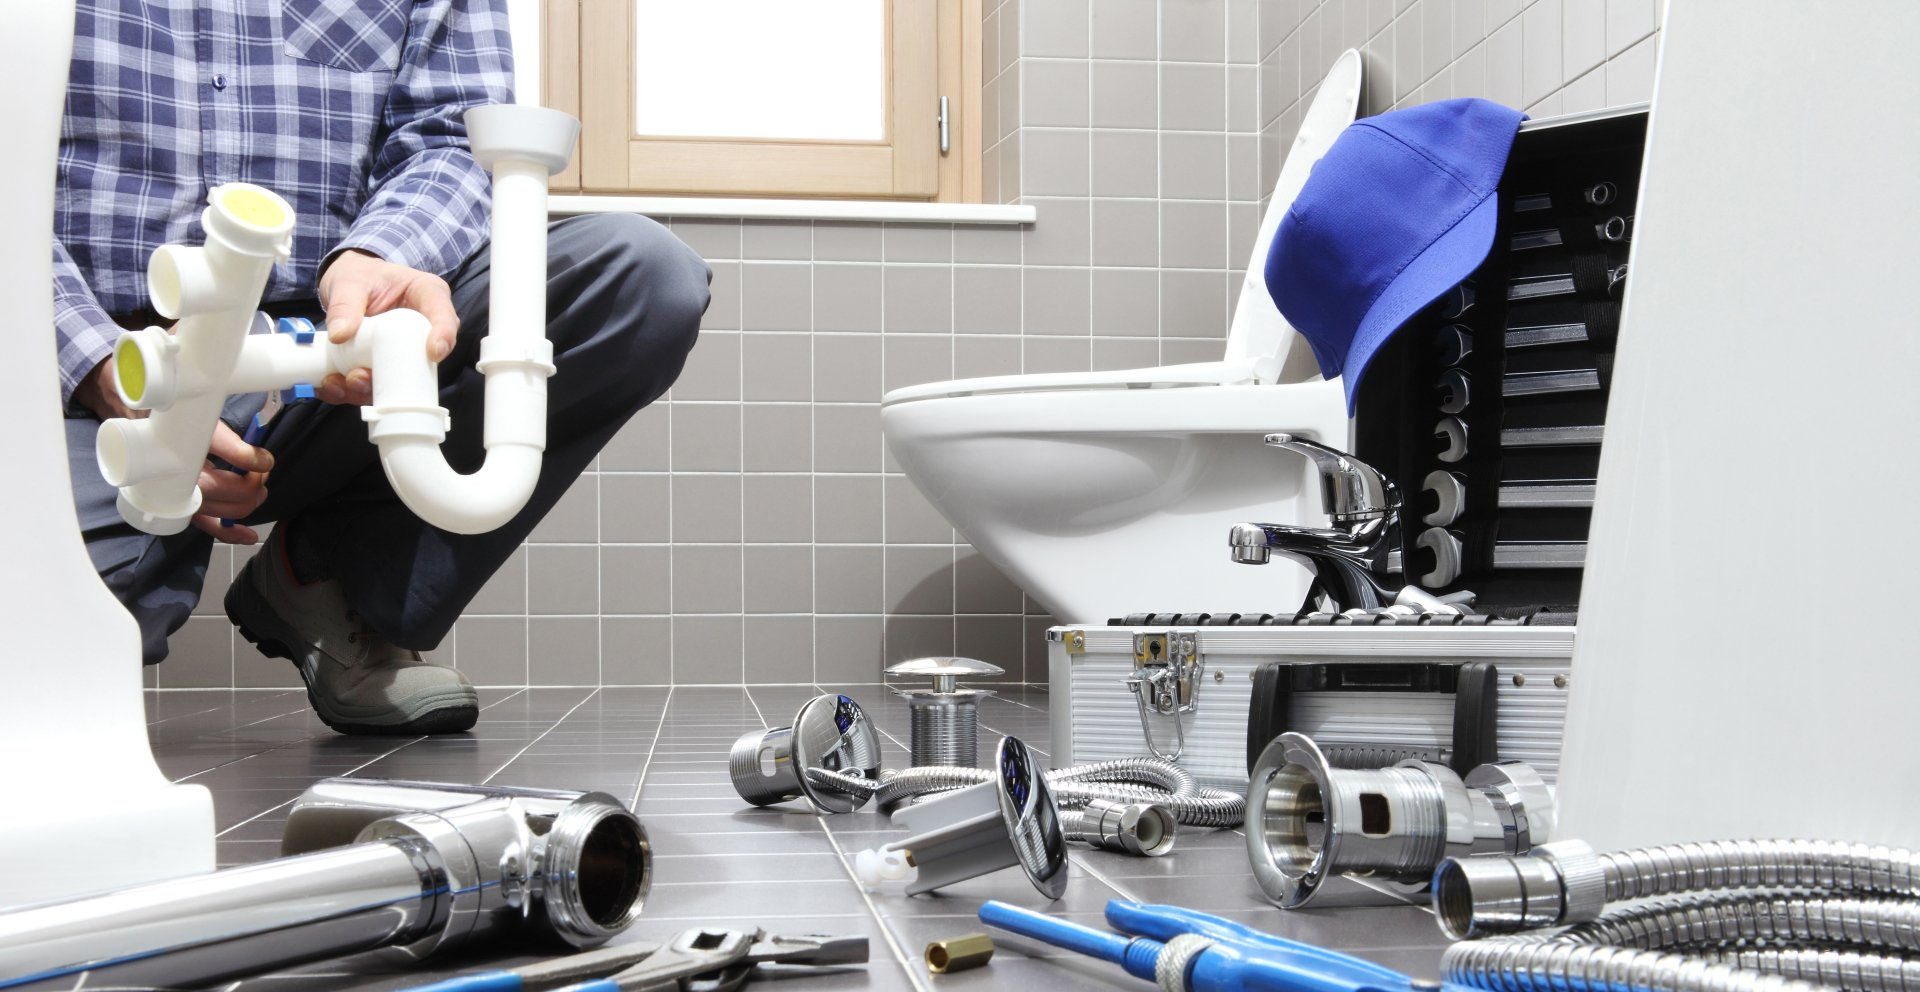 A plumber is fixing a toilet in a bathroom.